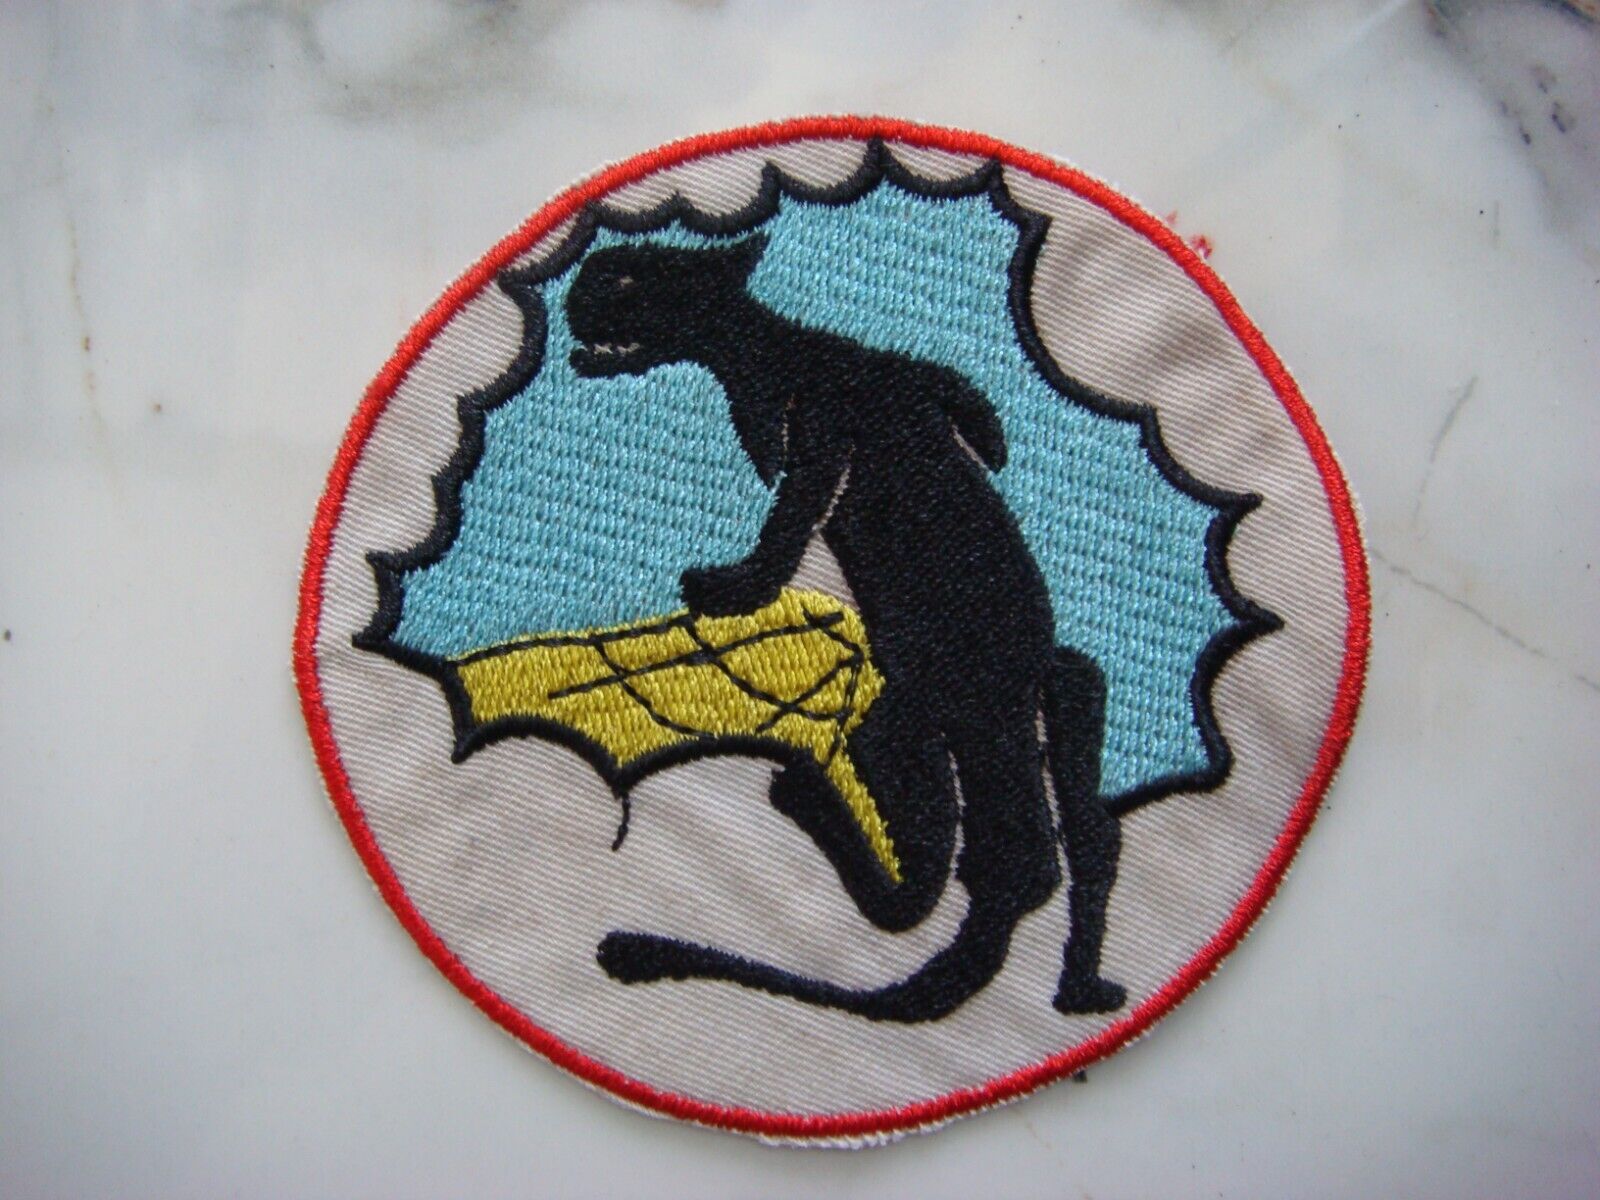 USAF 331st BOMBARDMENT Squadron 94th BOMB GROUP PATCH